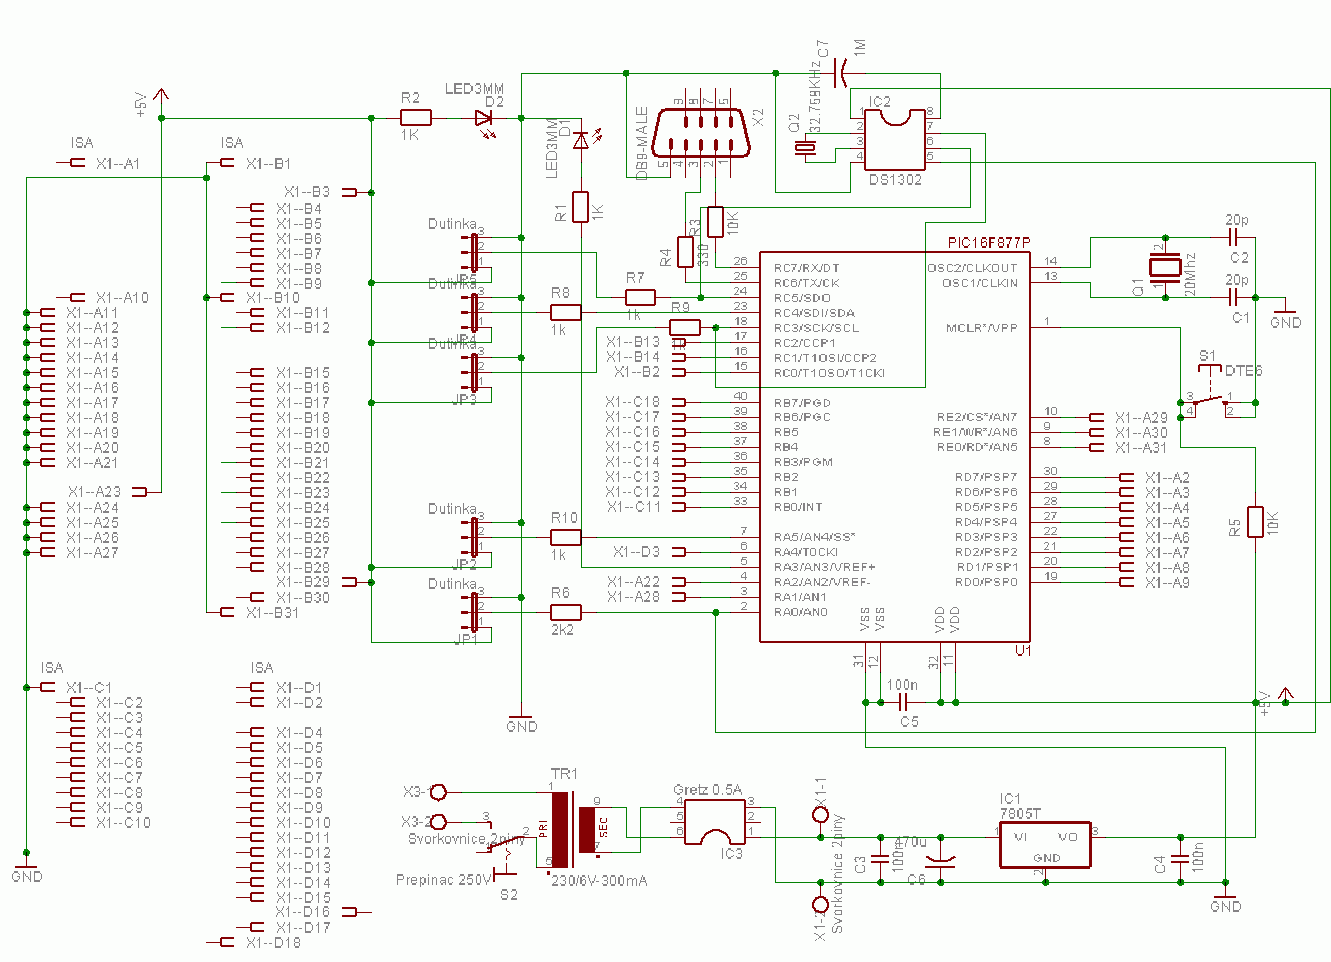 pic16f877-and-ethernet-with-tcpip-protocol-schematic-circuit